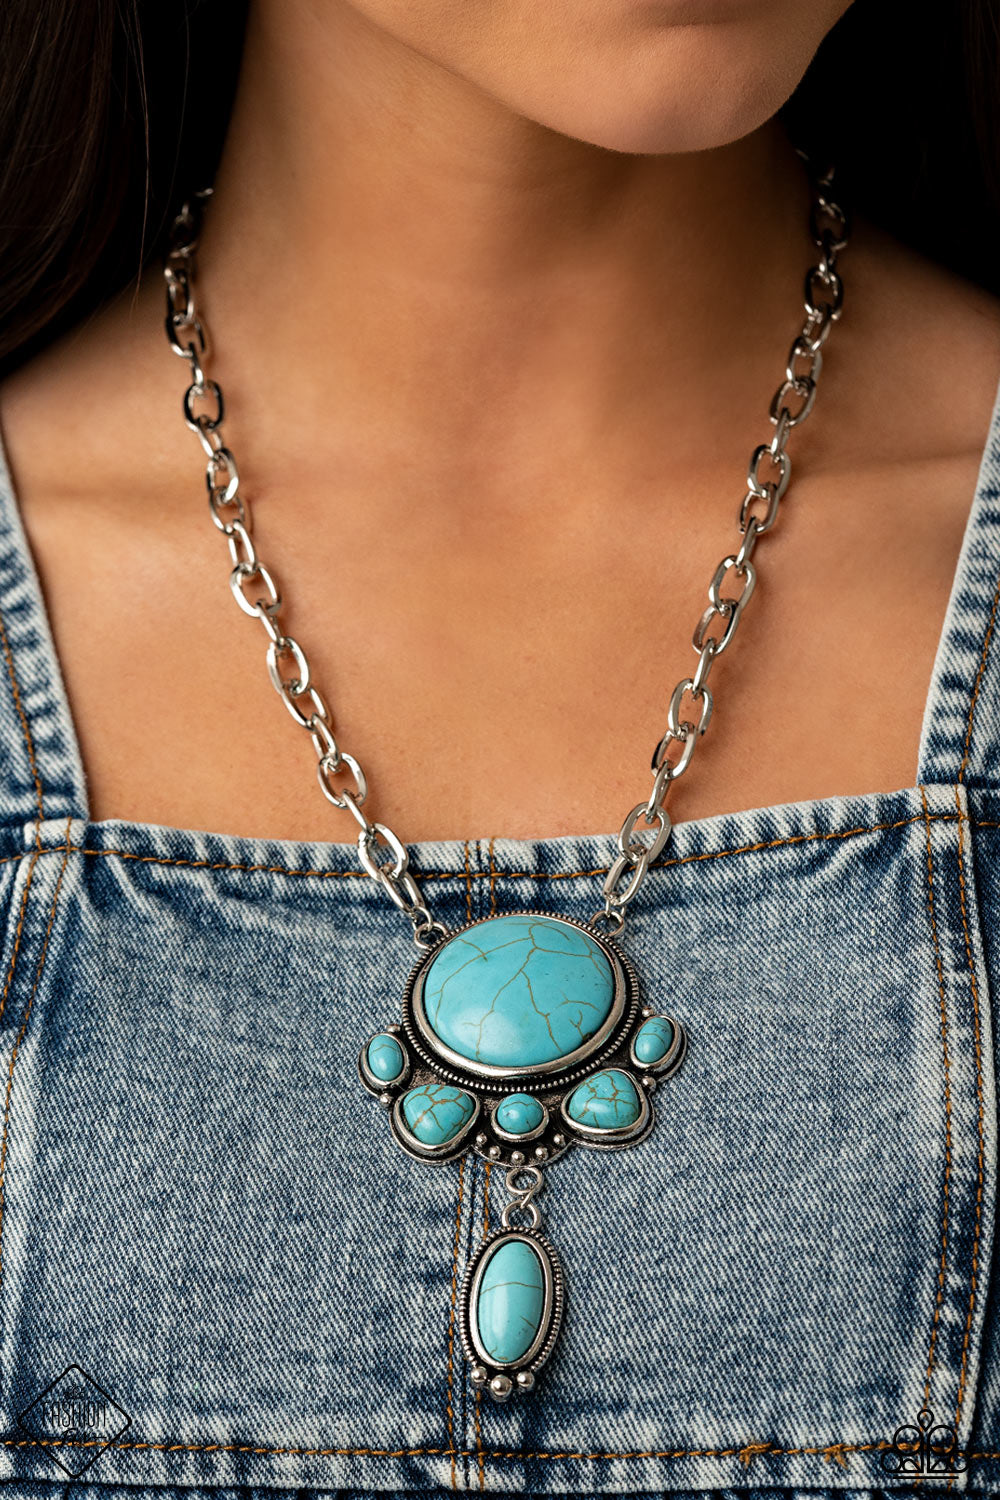 Geographically Gorgeous Necklace - Blue